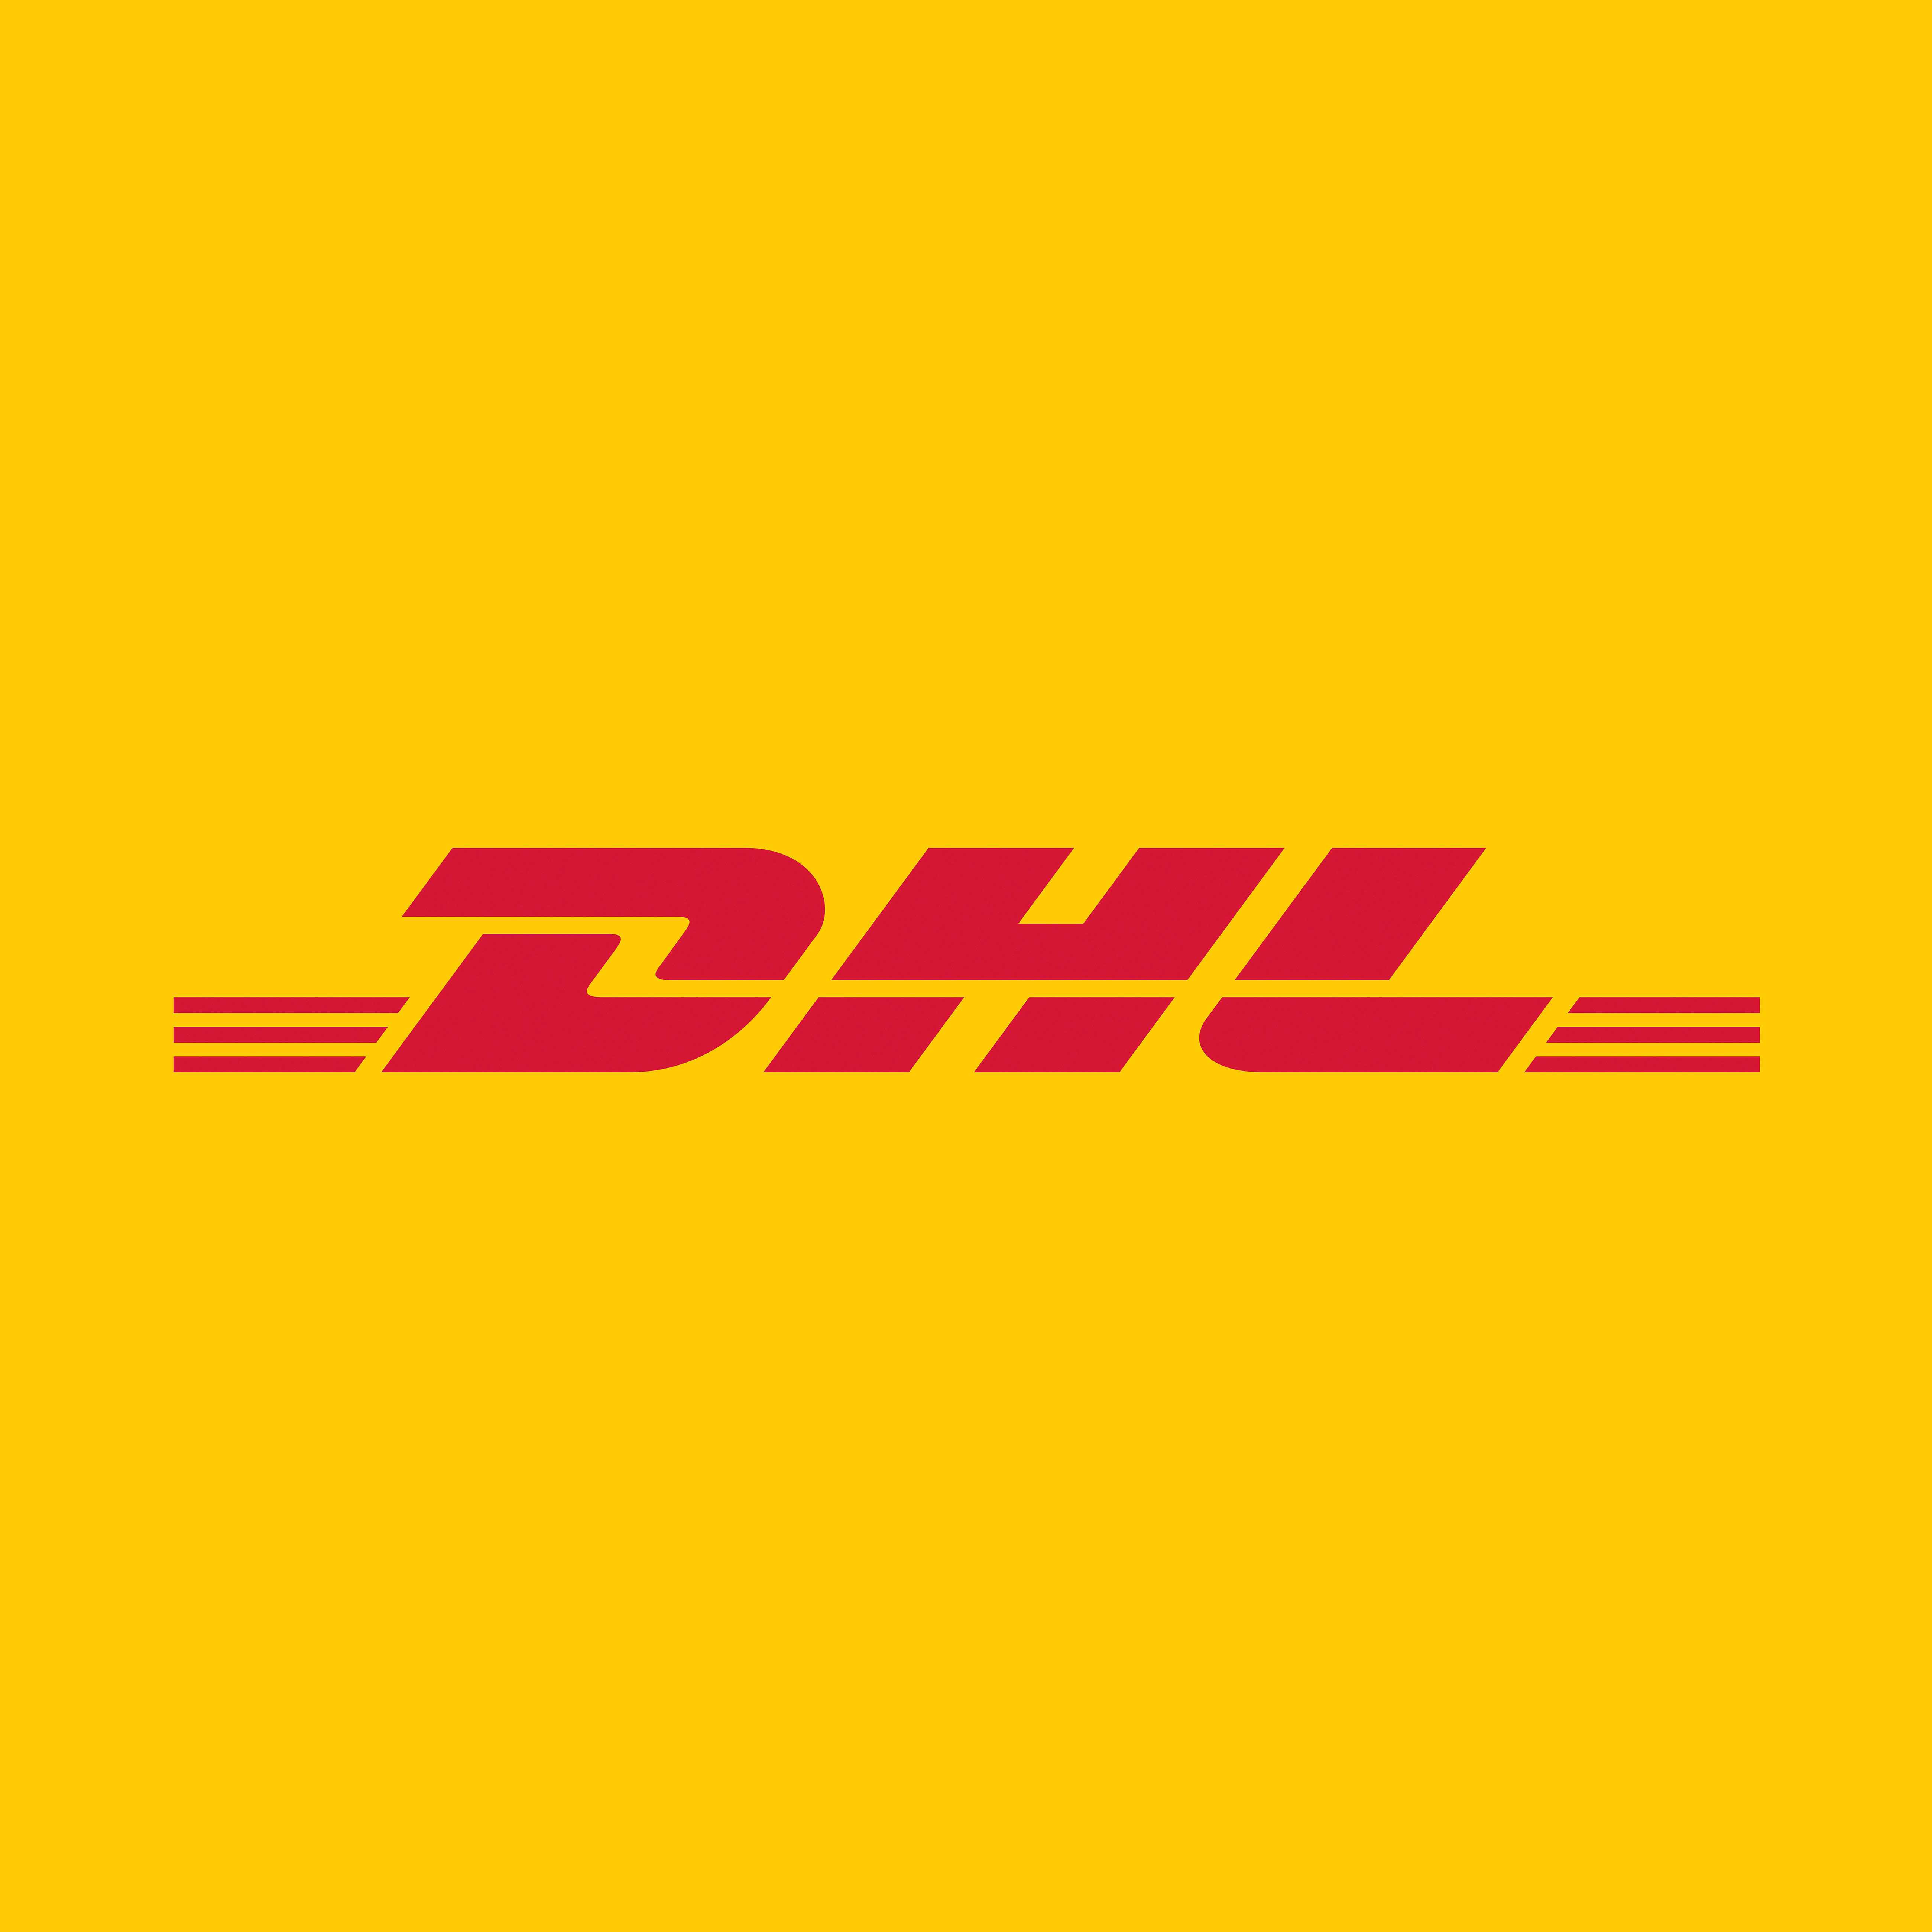 DHL Express Corporate Office